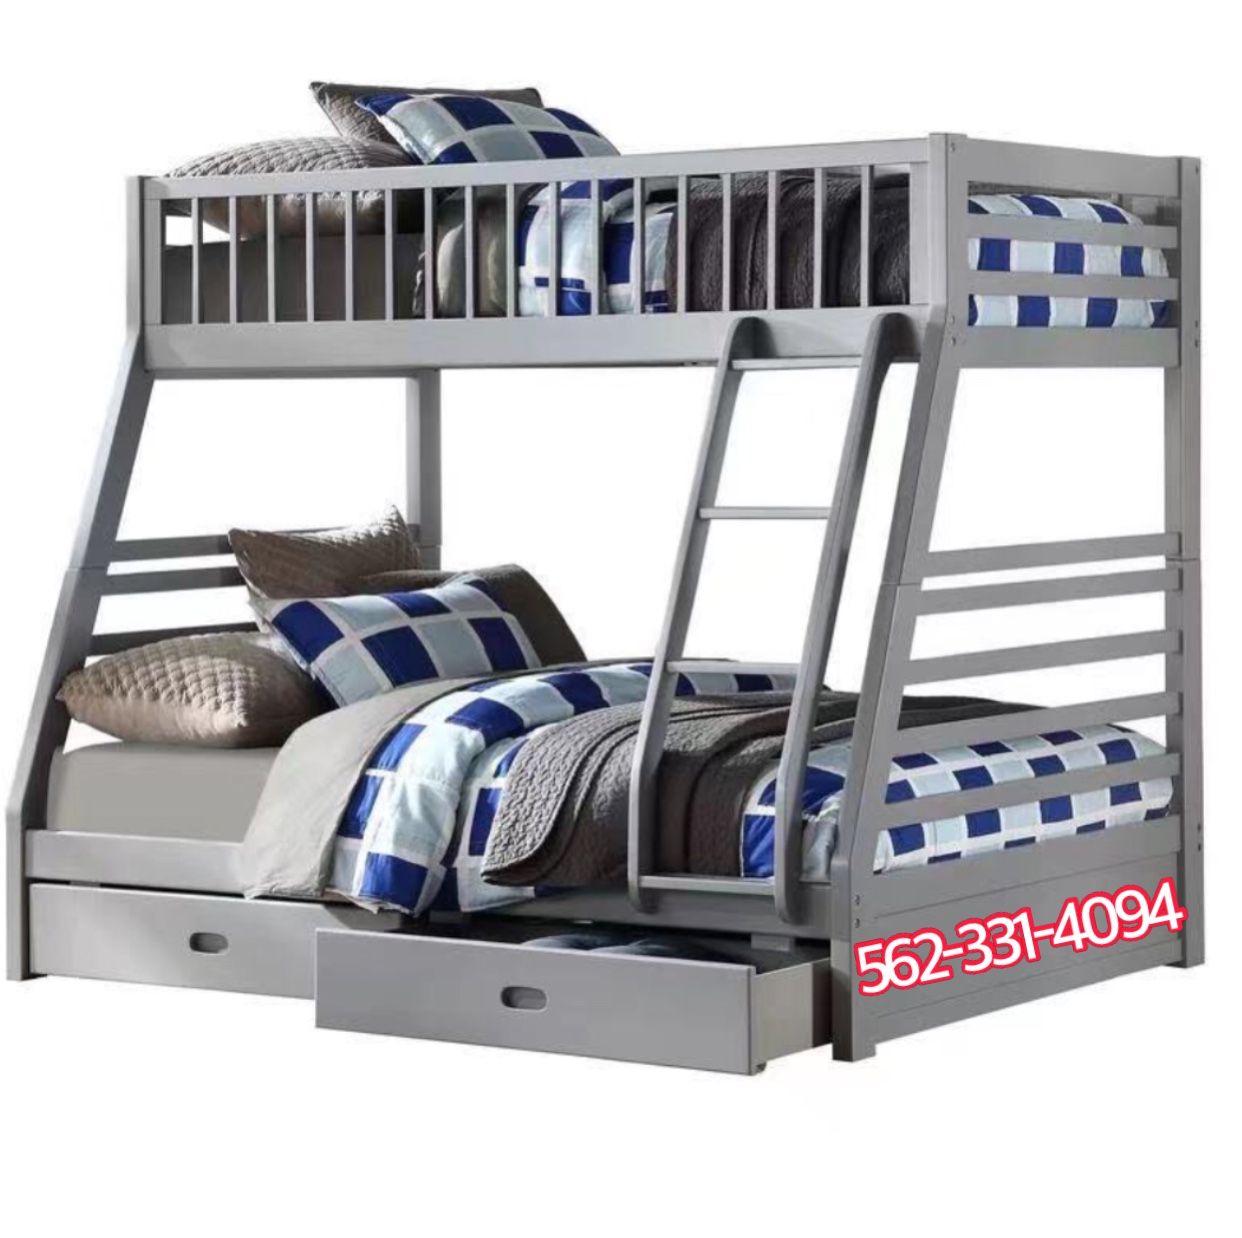 Brand New Mission Style Wooden Bunkbed With both mattresses included 